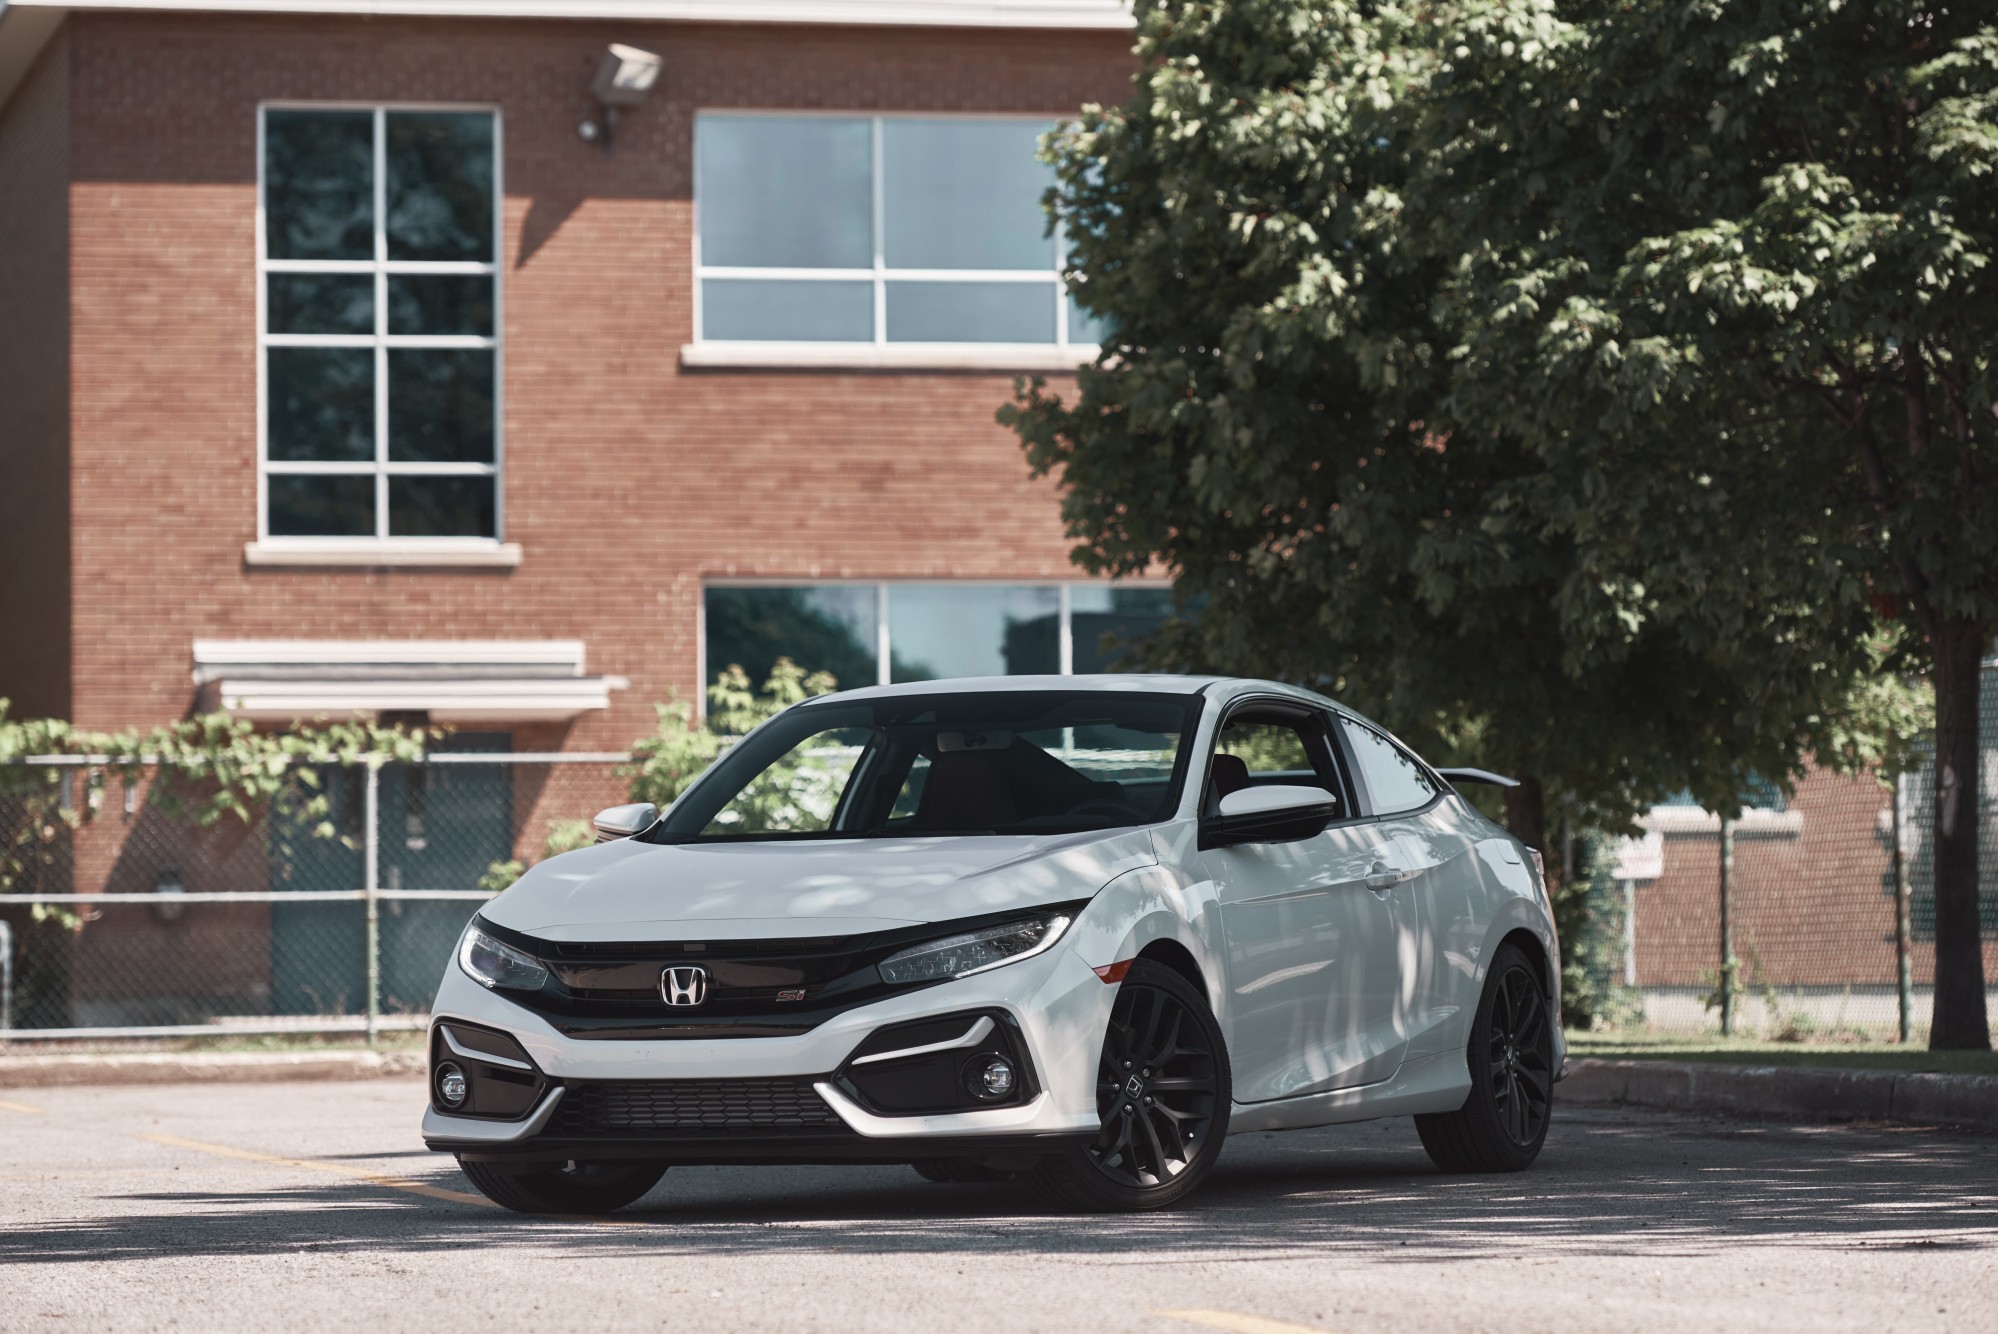 2020 Honda Civic Si Coupe in a parking lot